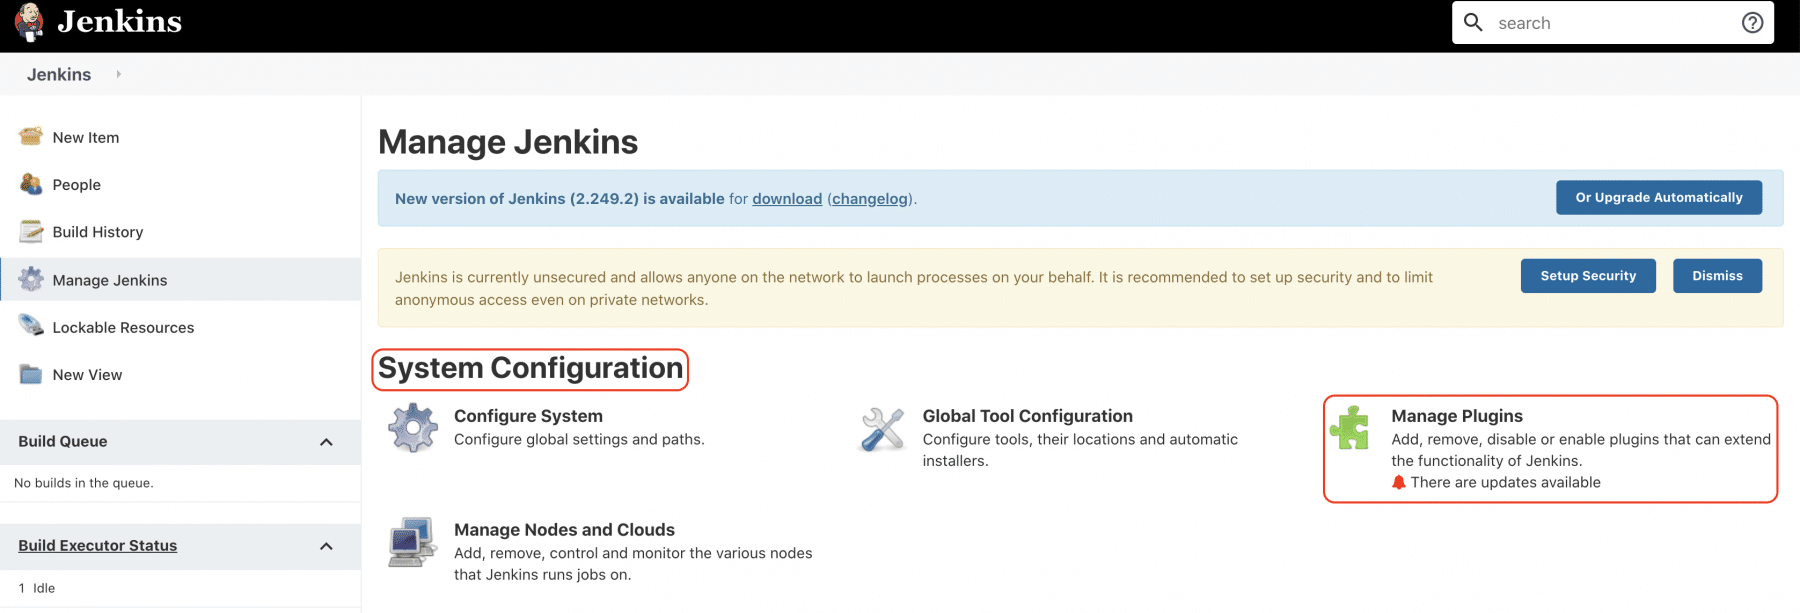 Manage Plugins Section in Jenkins